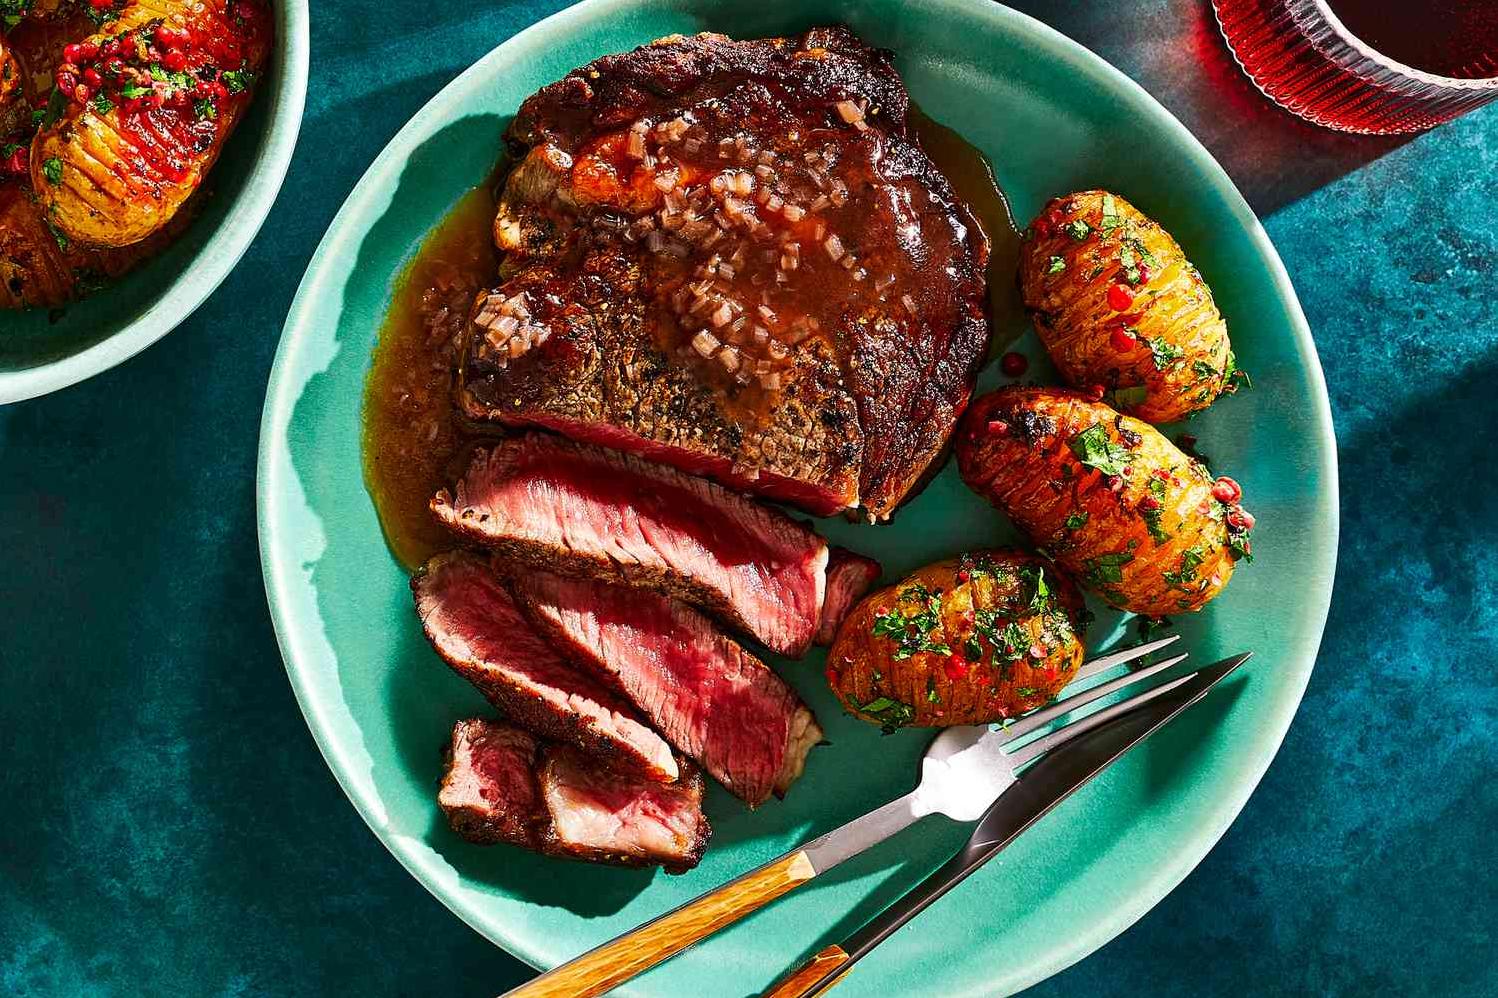  A sauce that takes your steak from good to great